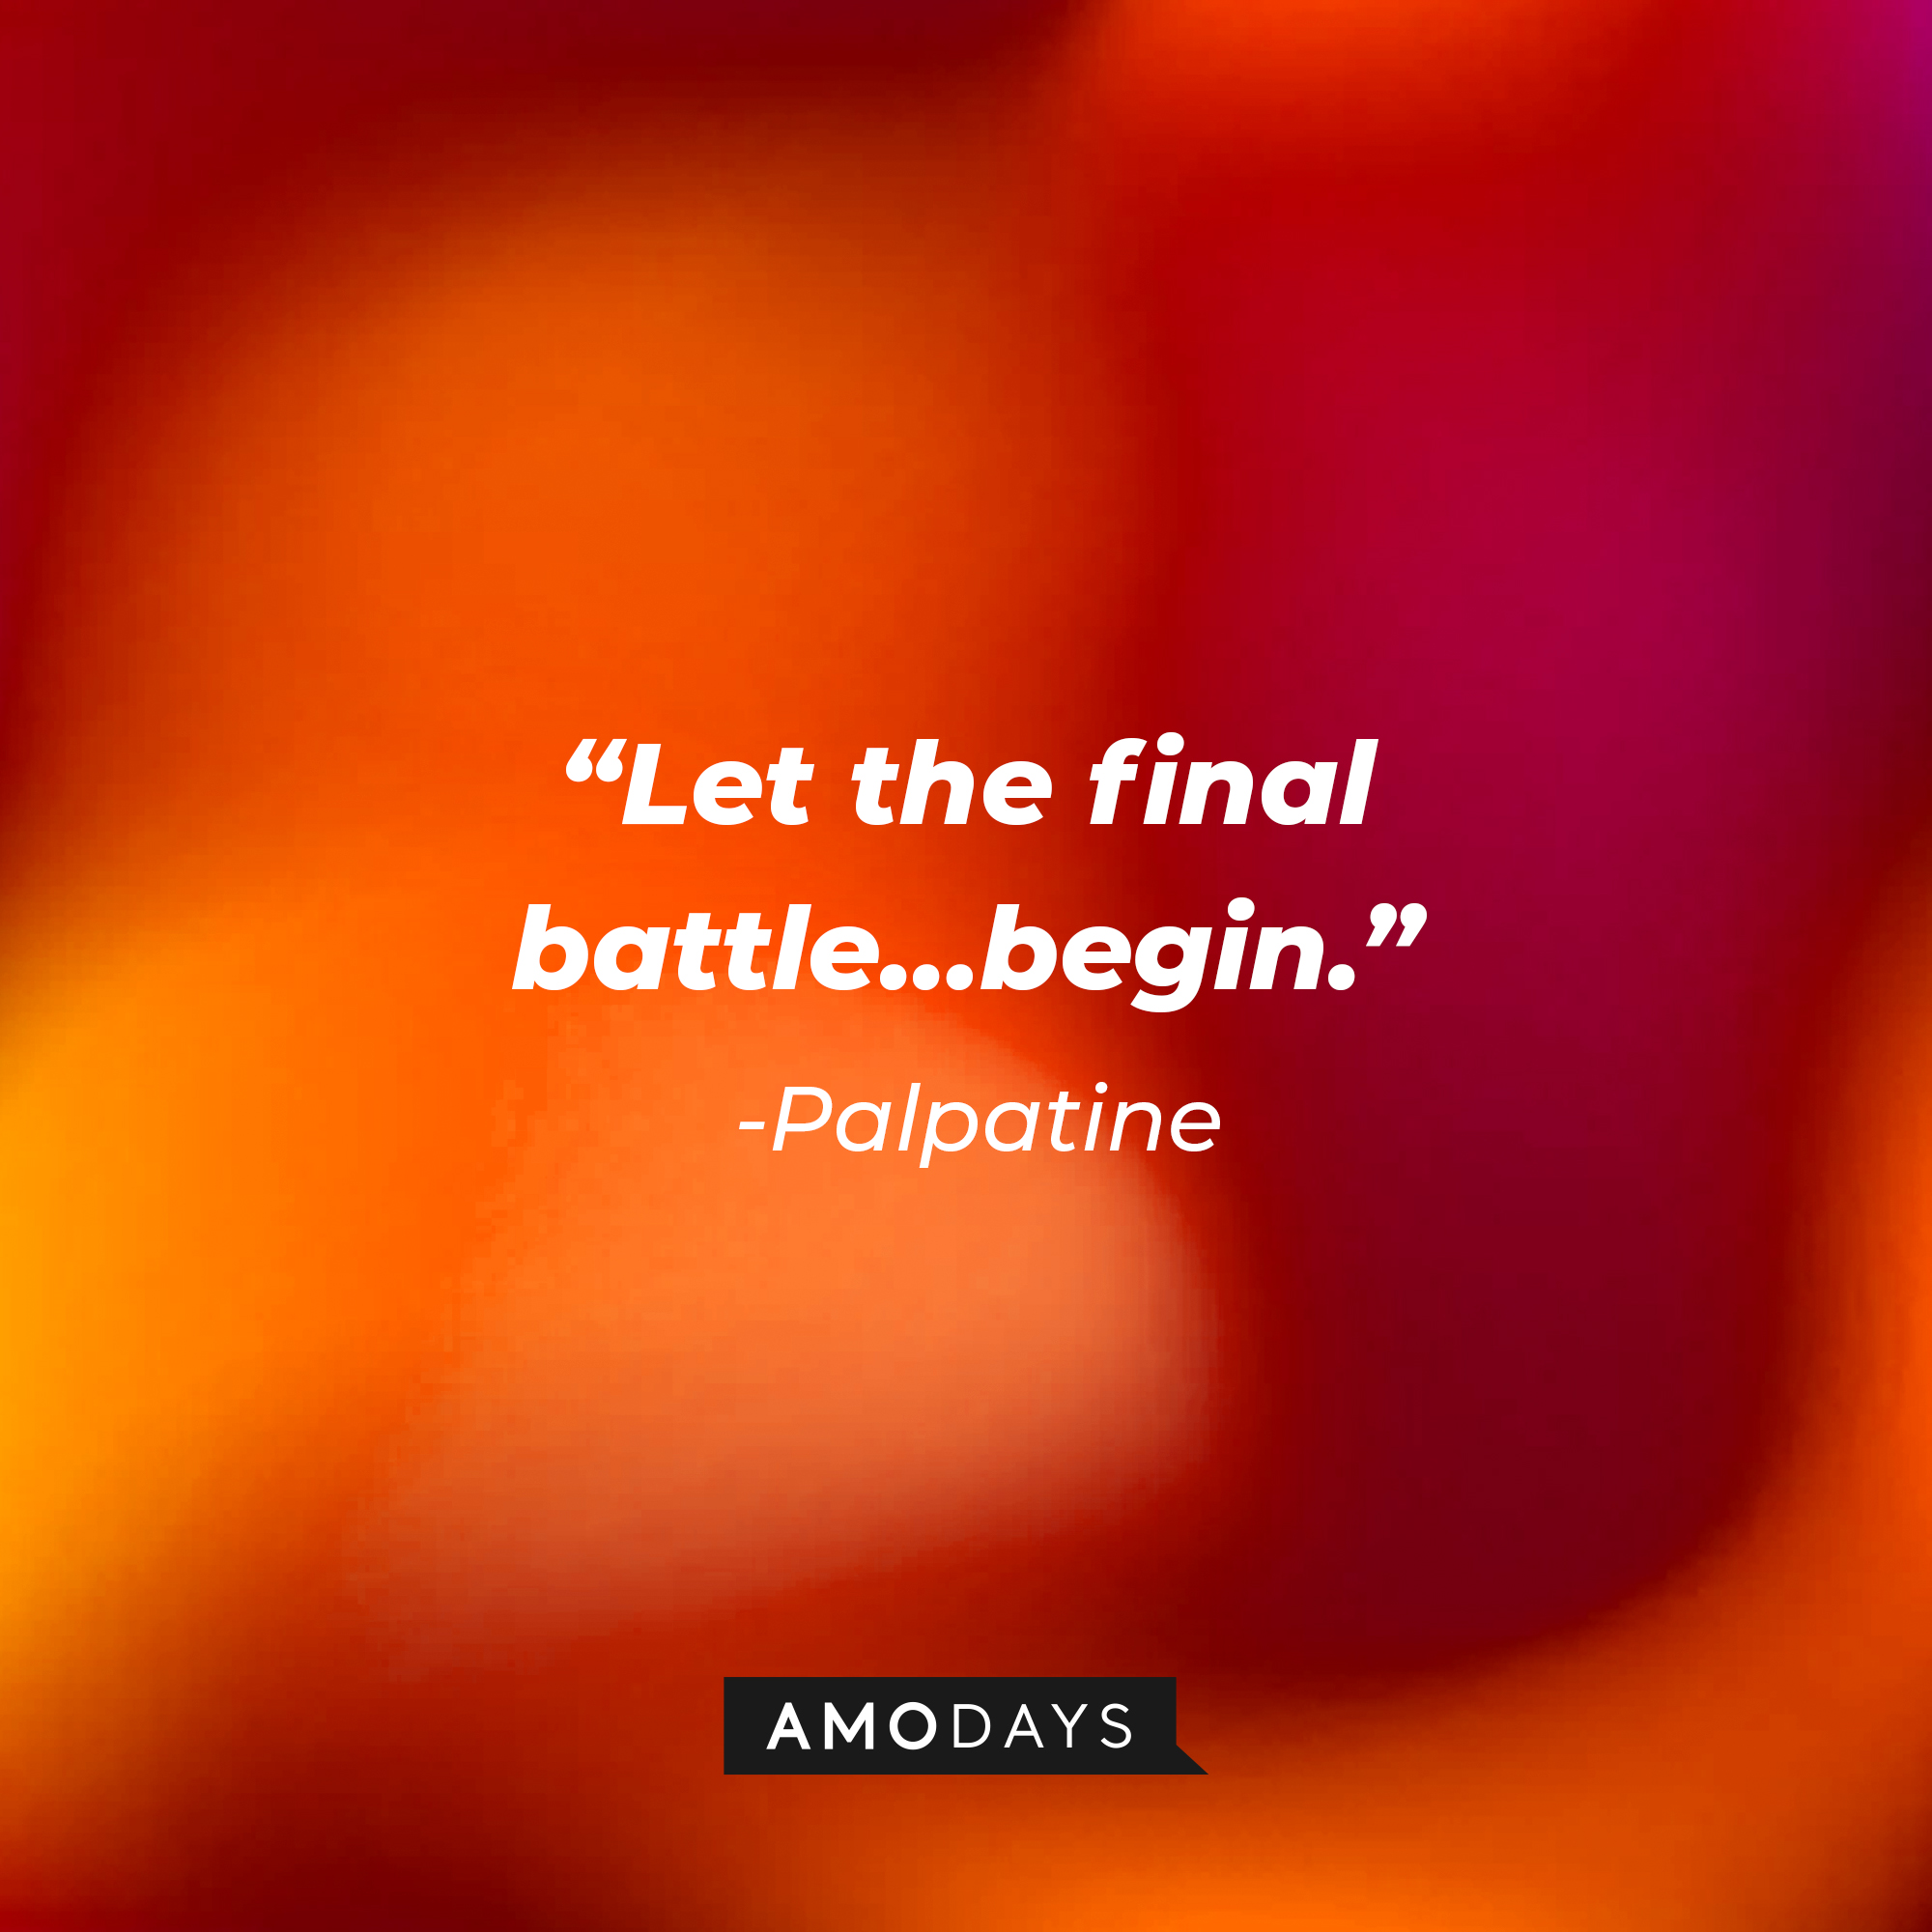 Palpatine’s quote: “Let the final battle…begin.” | Source: AmoDays